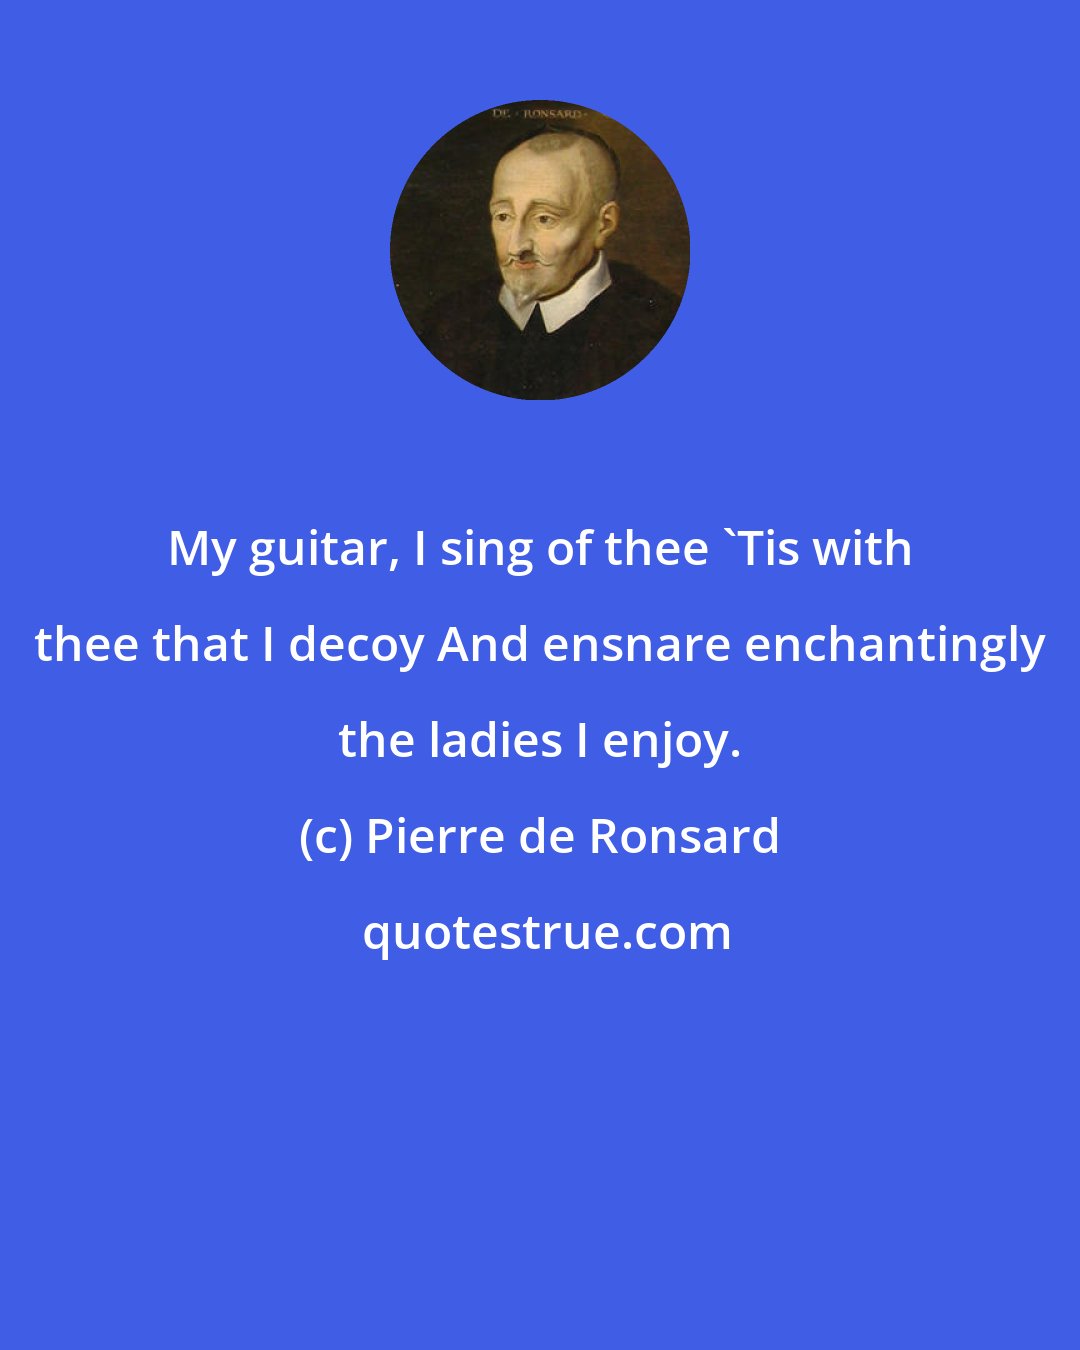 Pierre de Ronsard: My guitar, I sing of thee 'Tis with thee that I decoy And ensnare enchantingly the ladies I enjoy.